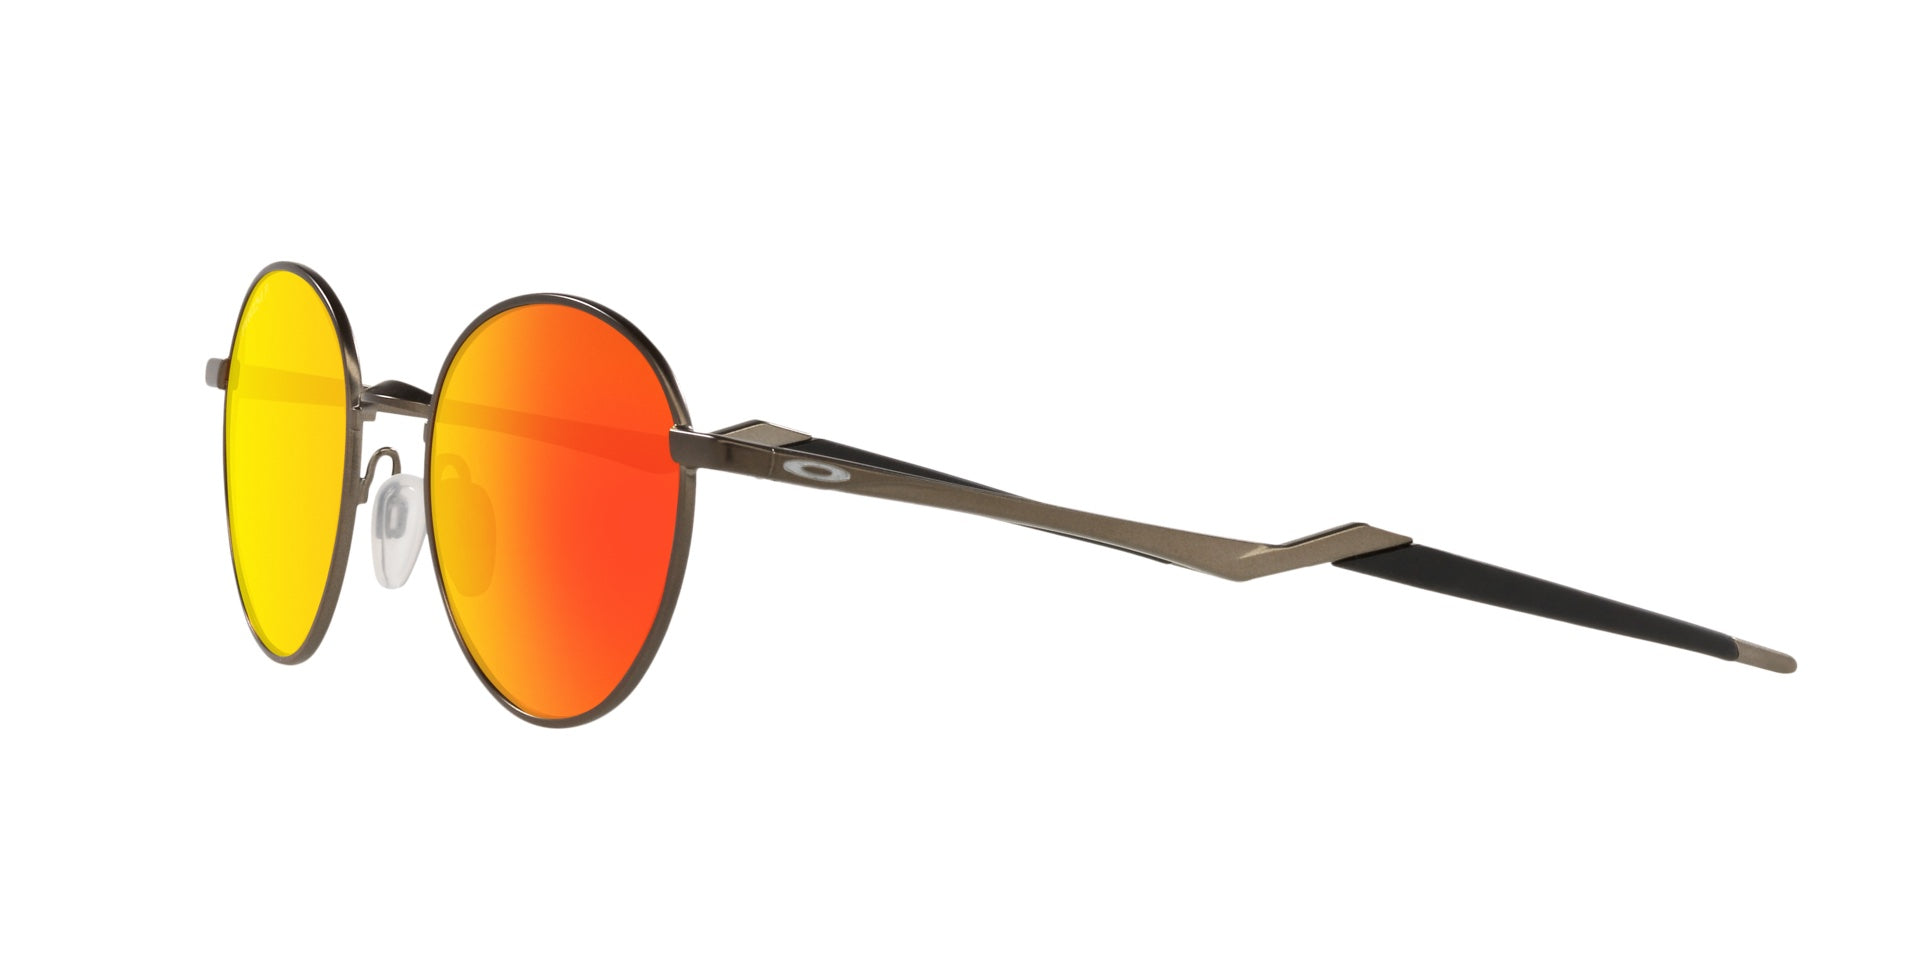 Men’s sunglasses - A side view of the Terrigal model:  A round satin pewter frame made of Oakley's lightweight C-5 metal. The lenses are prism ruby and polarized